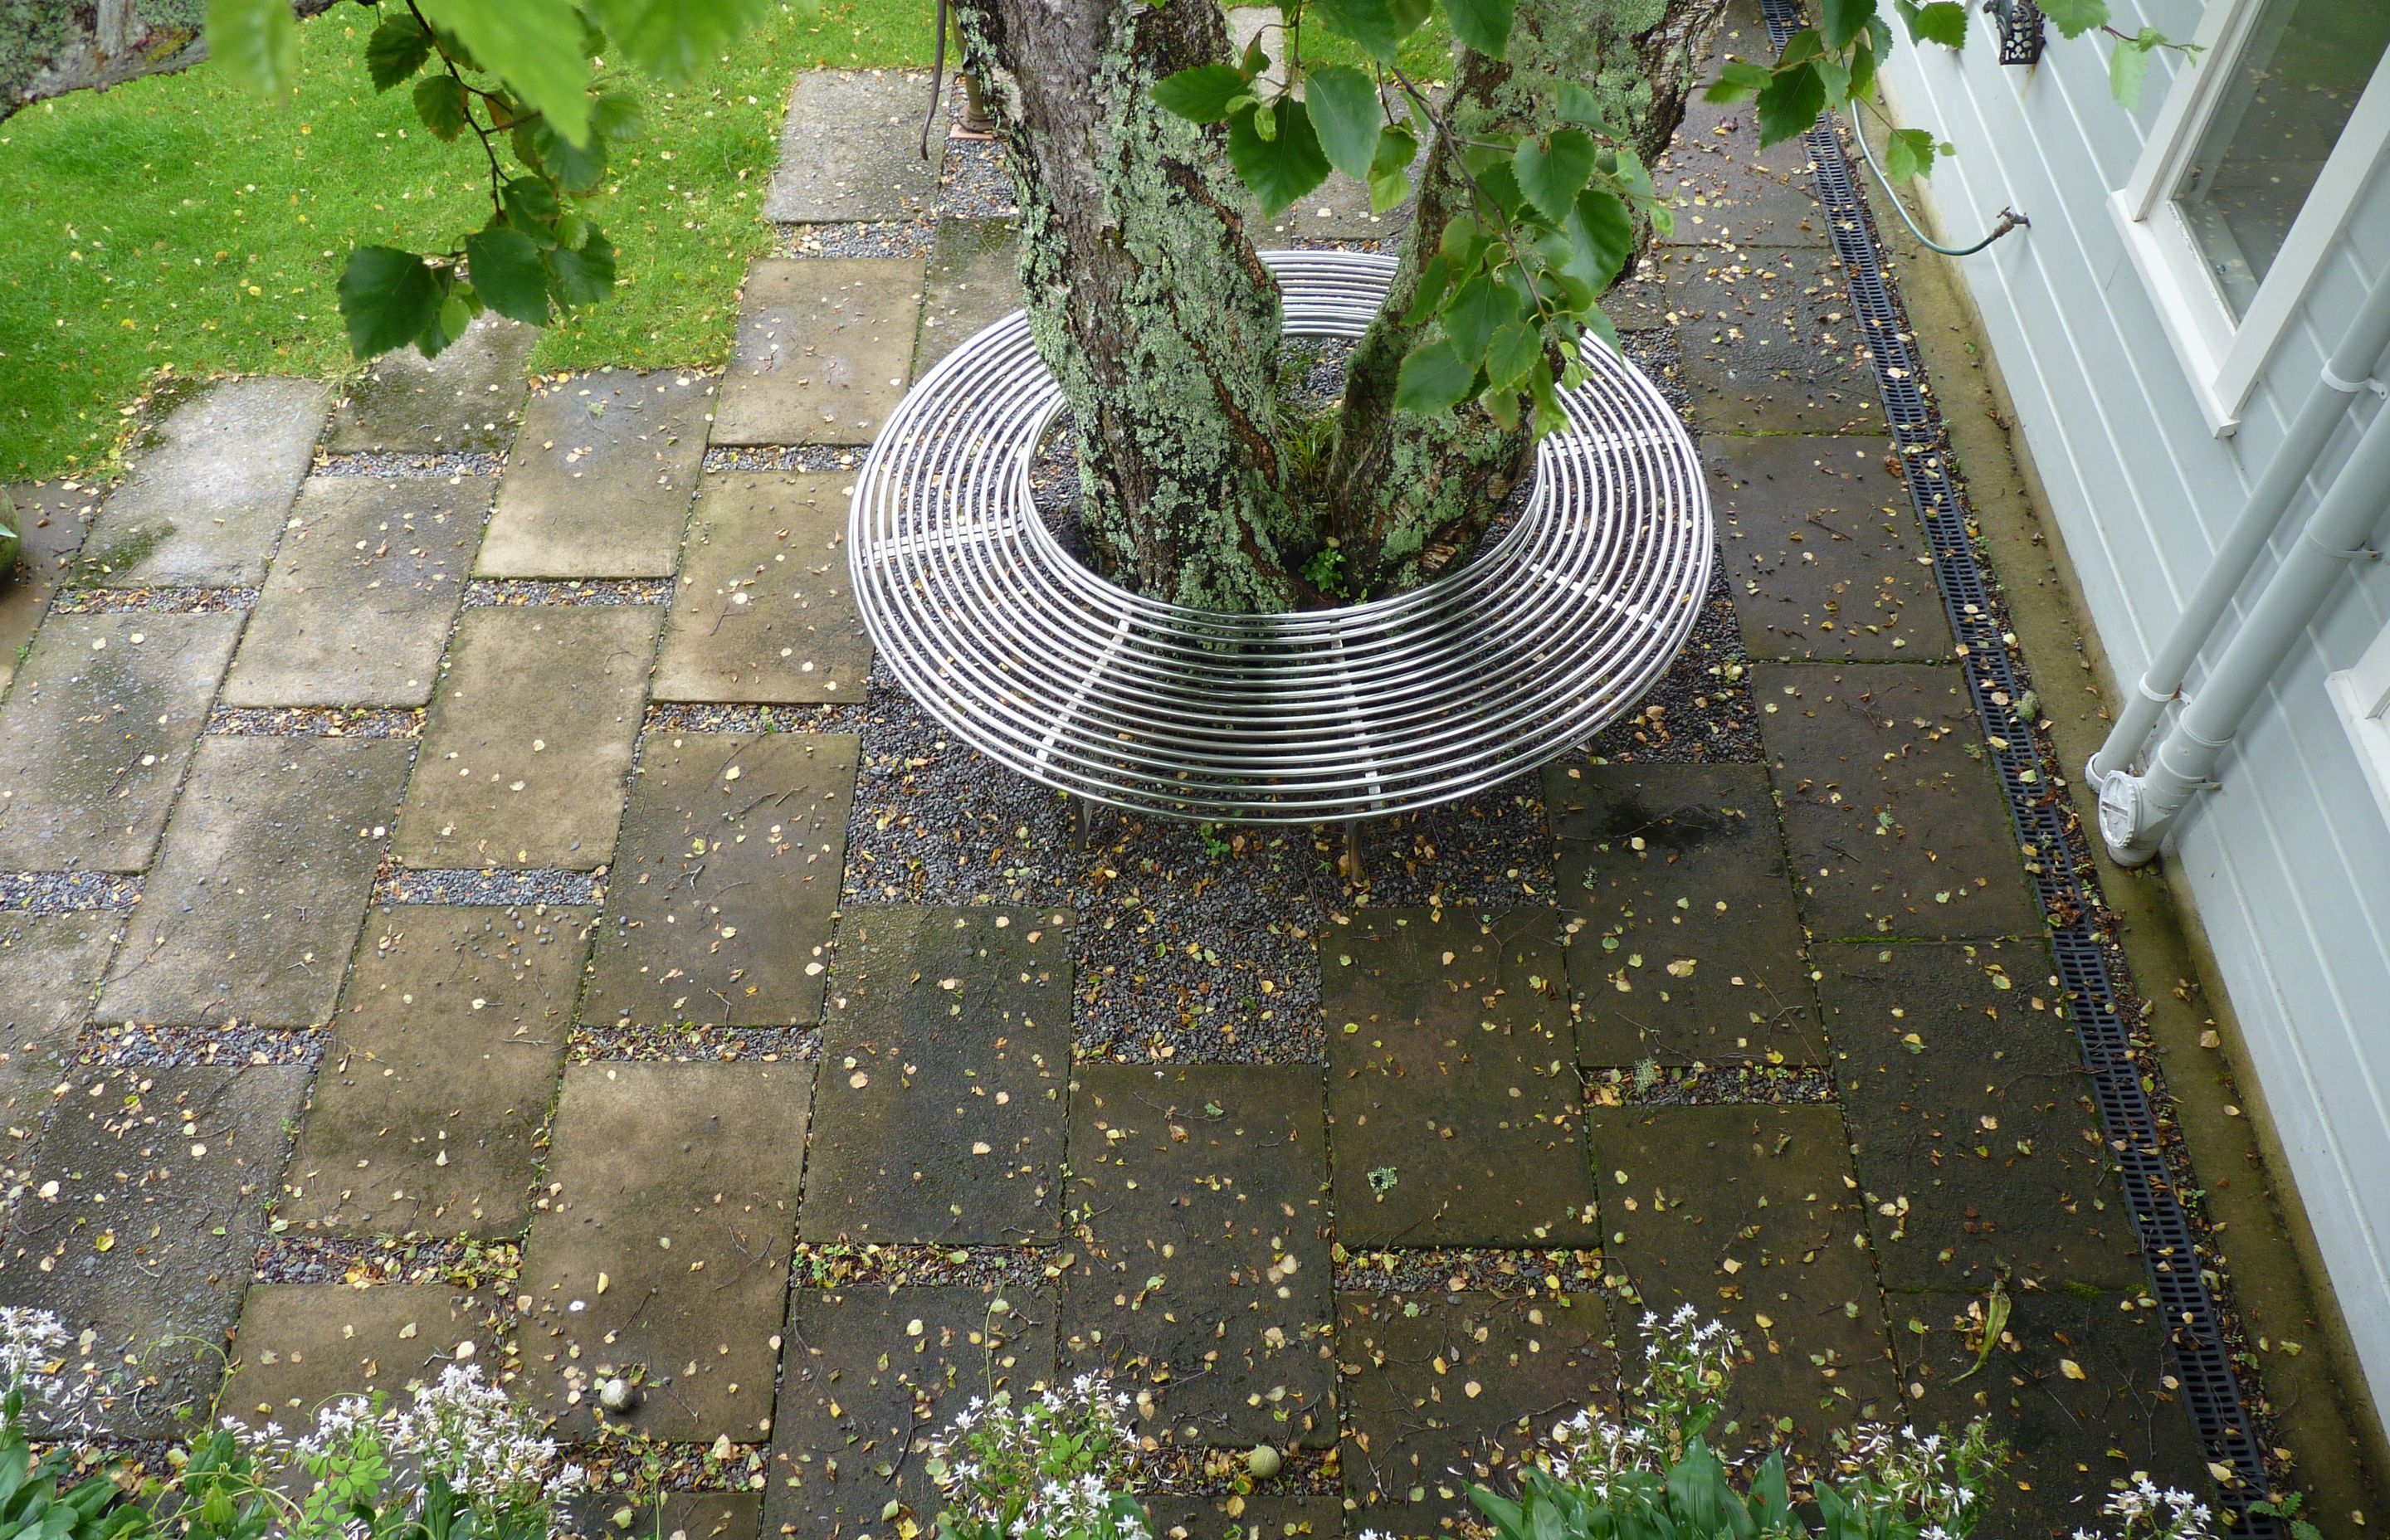 We relaid the existing concrete pavers in a new pattern around the base of the tree, to improve drainage and create a hard surface under the new washing line